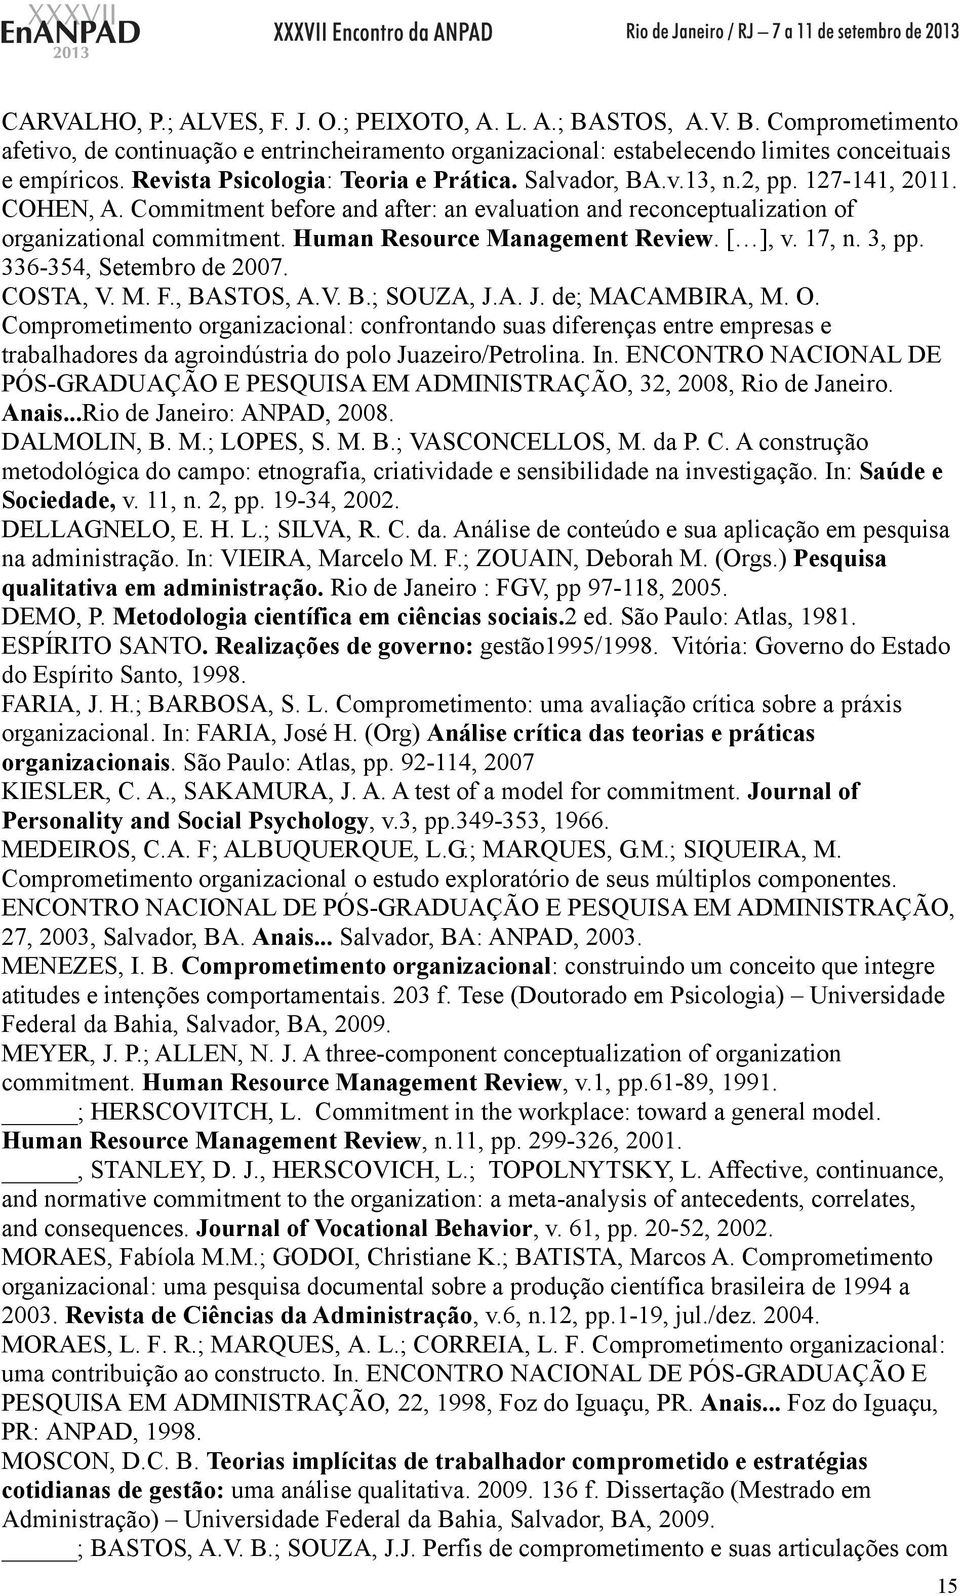 Human Resource Management Review. [ ], v. 17, n. 3, pp. 336-354, Setembro de 2007. COSTA, V. M. F., BASTOS, A.V. B.; SOUZA, J.A. J. de; MACAMBIRA, M. O.